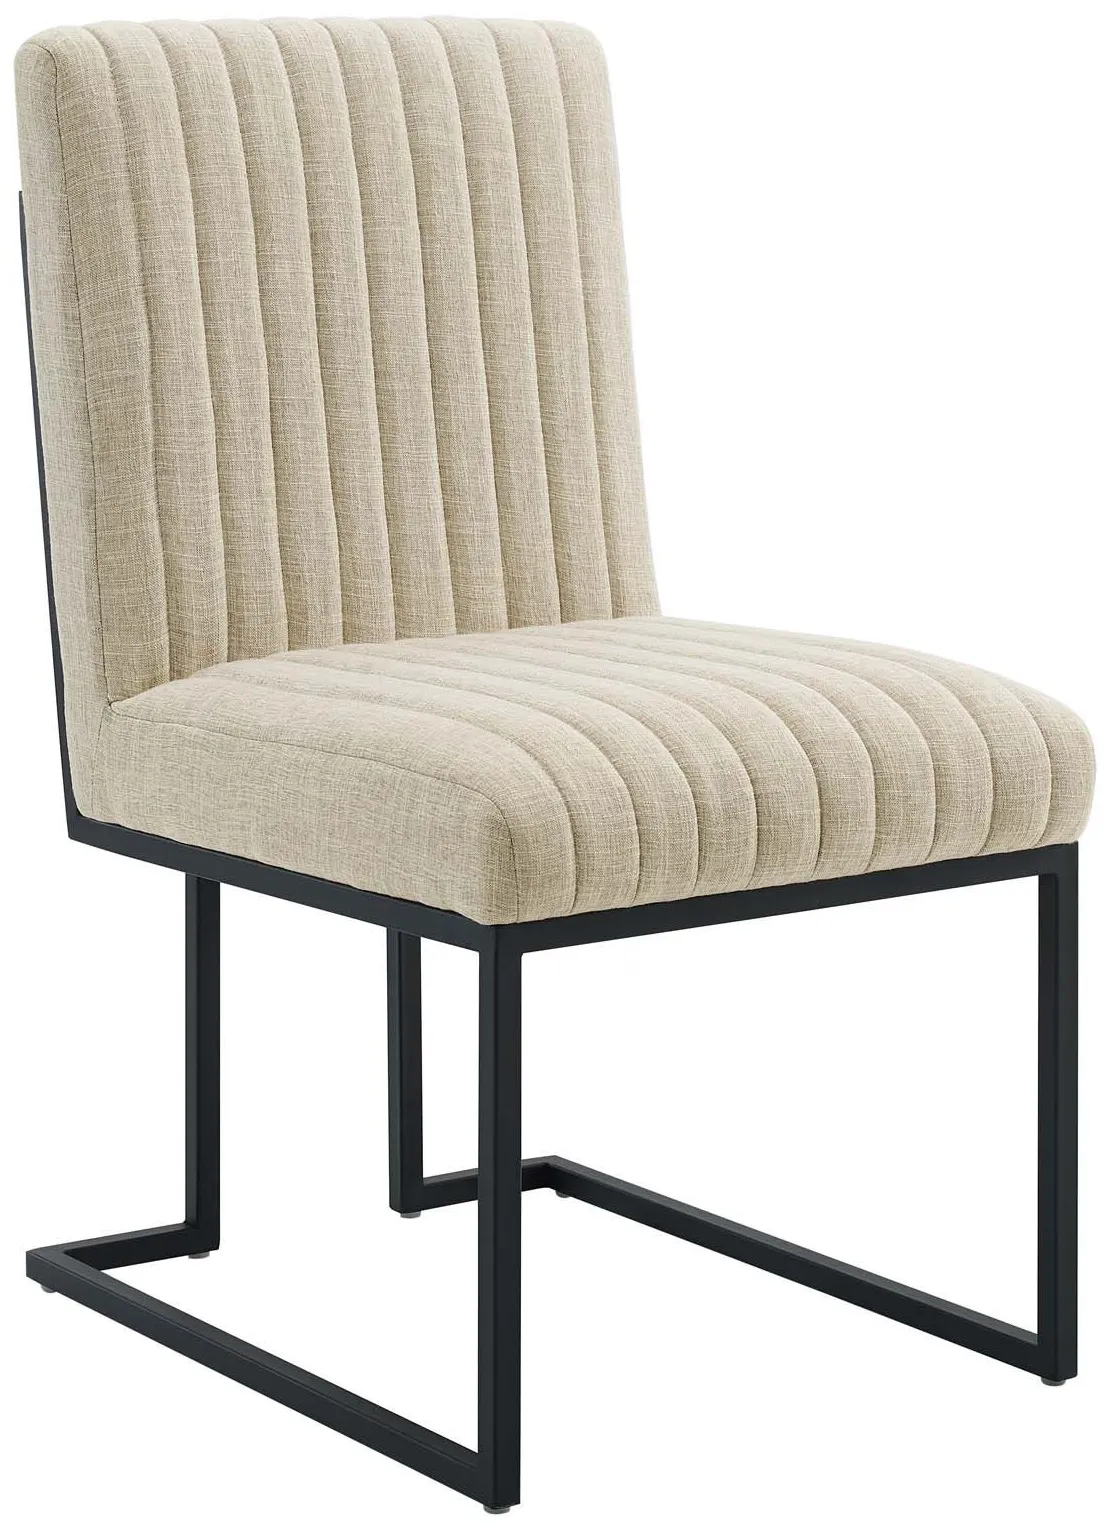 Indulge Channel Tufted Fabric Dining Chair in Beige